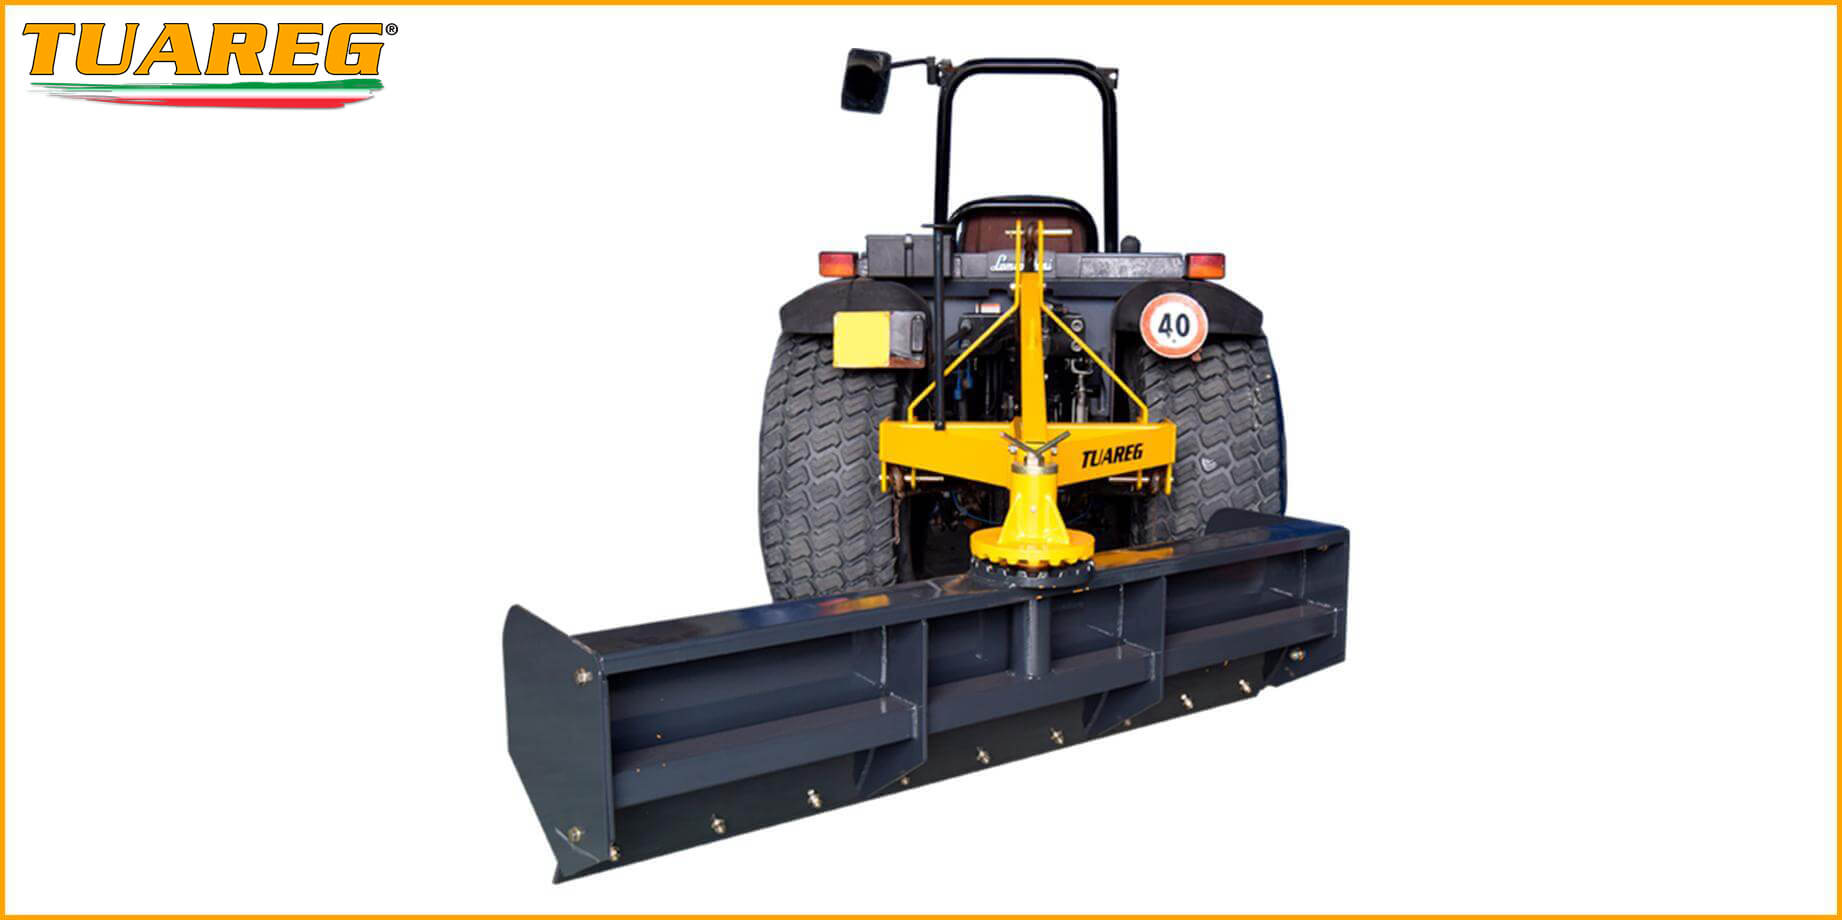 Leveller Blade - Tuareg - Tractor towed equipment for beach cleaning